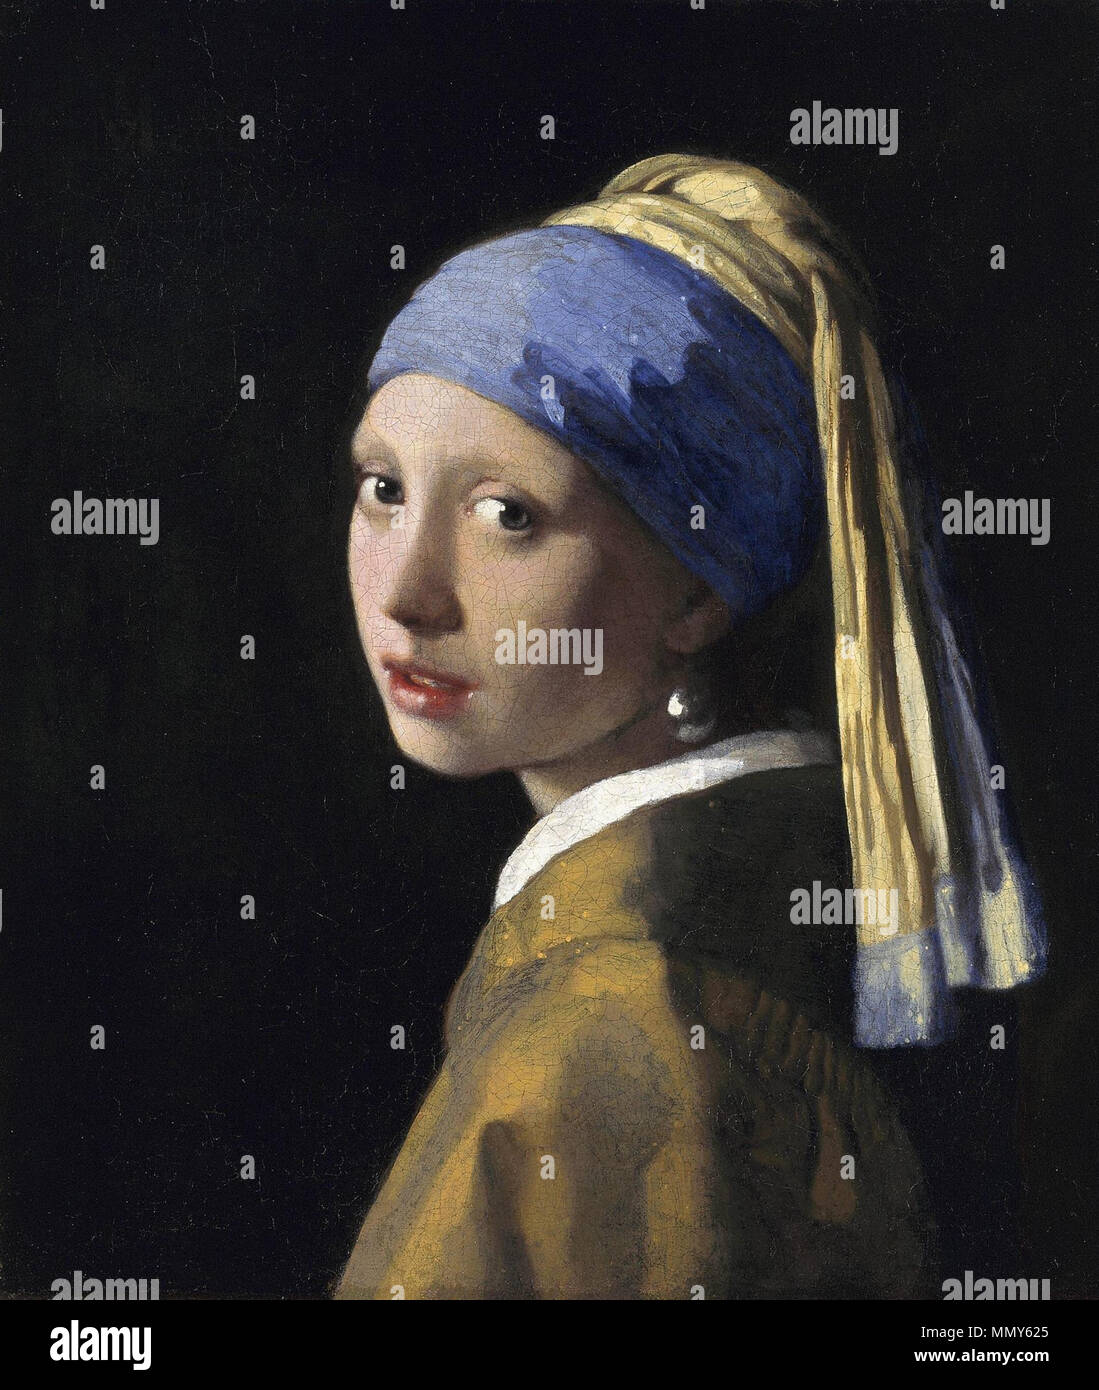 . Portrait of a girl, at bust-length, facing left, looking at the viewer. She is wearing a yellow and blue turban, a light brown coat and an earring with a single pearl. The painting is an example of a tronie, a common genre of the time depicting stock characters rather than any given individual.  The Girl with a Pearl Earring. Circa 1665. Girl with a Pearl Earring Stock Photo